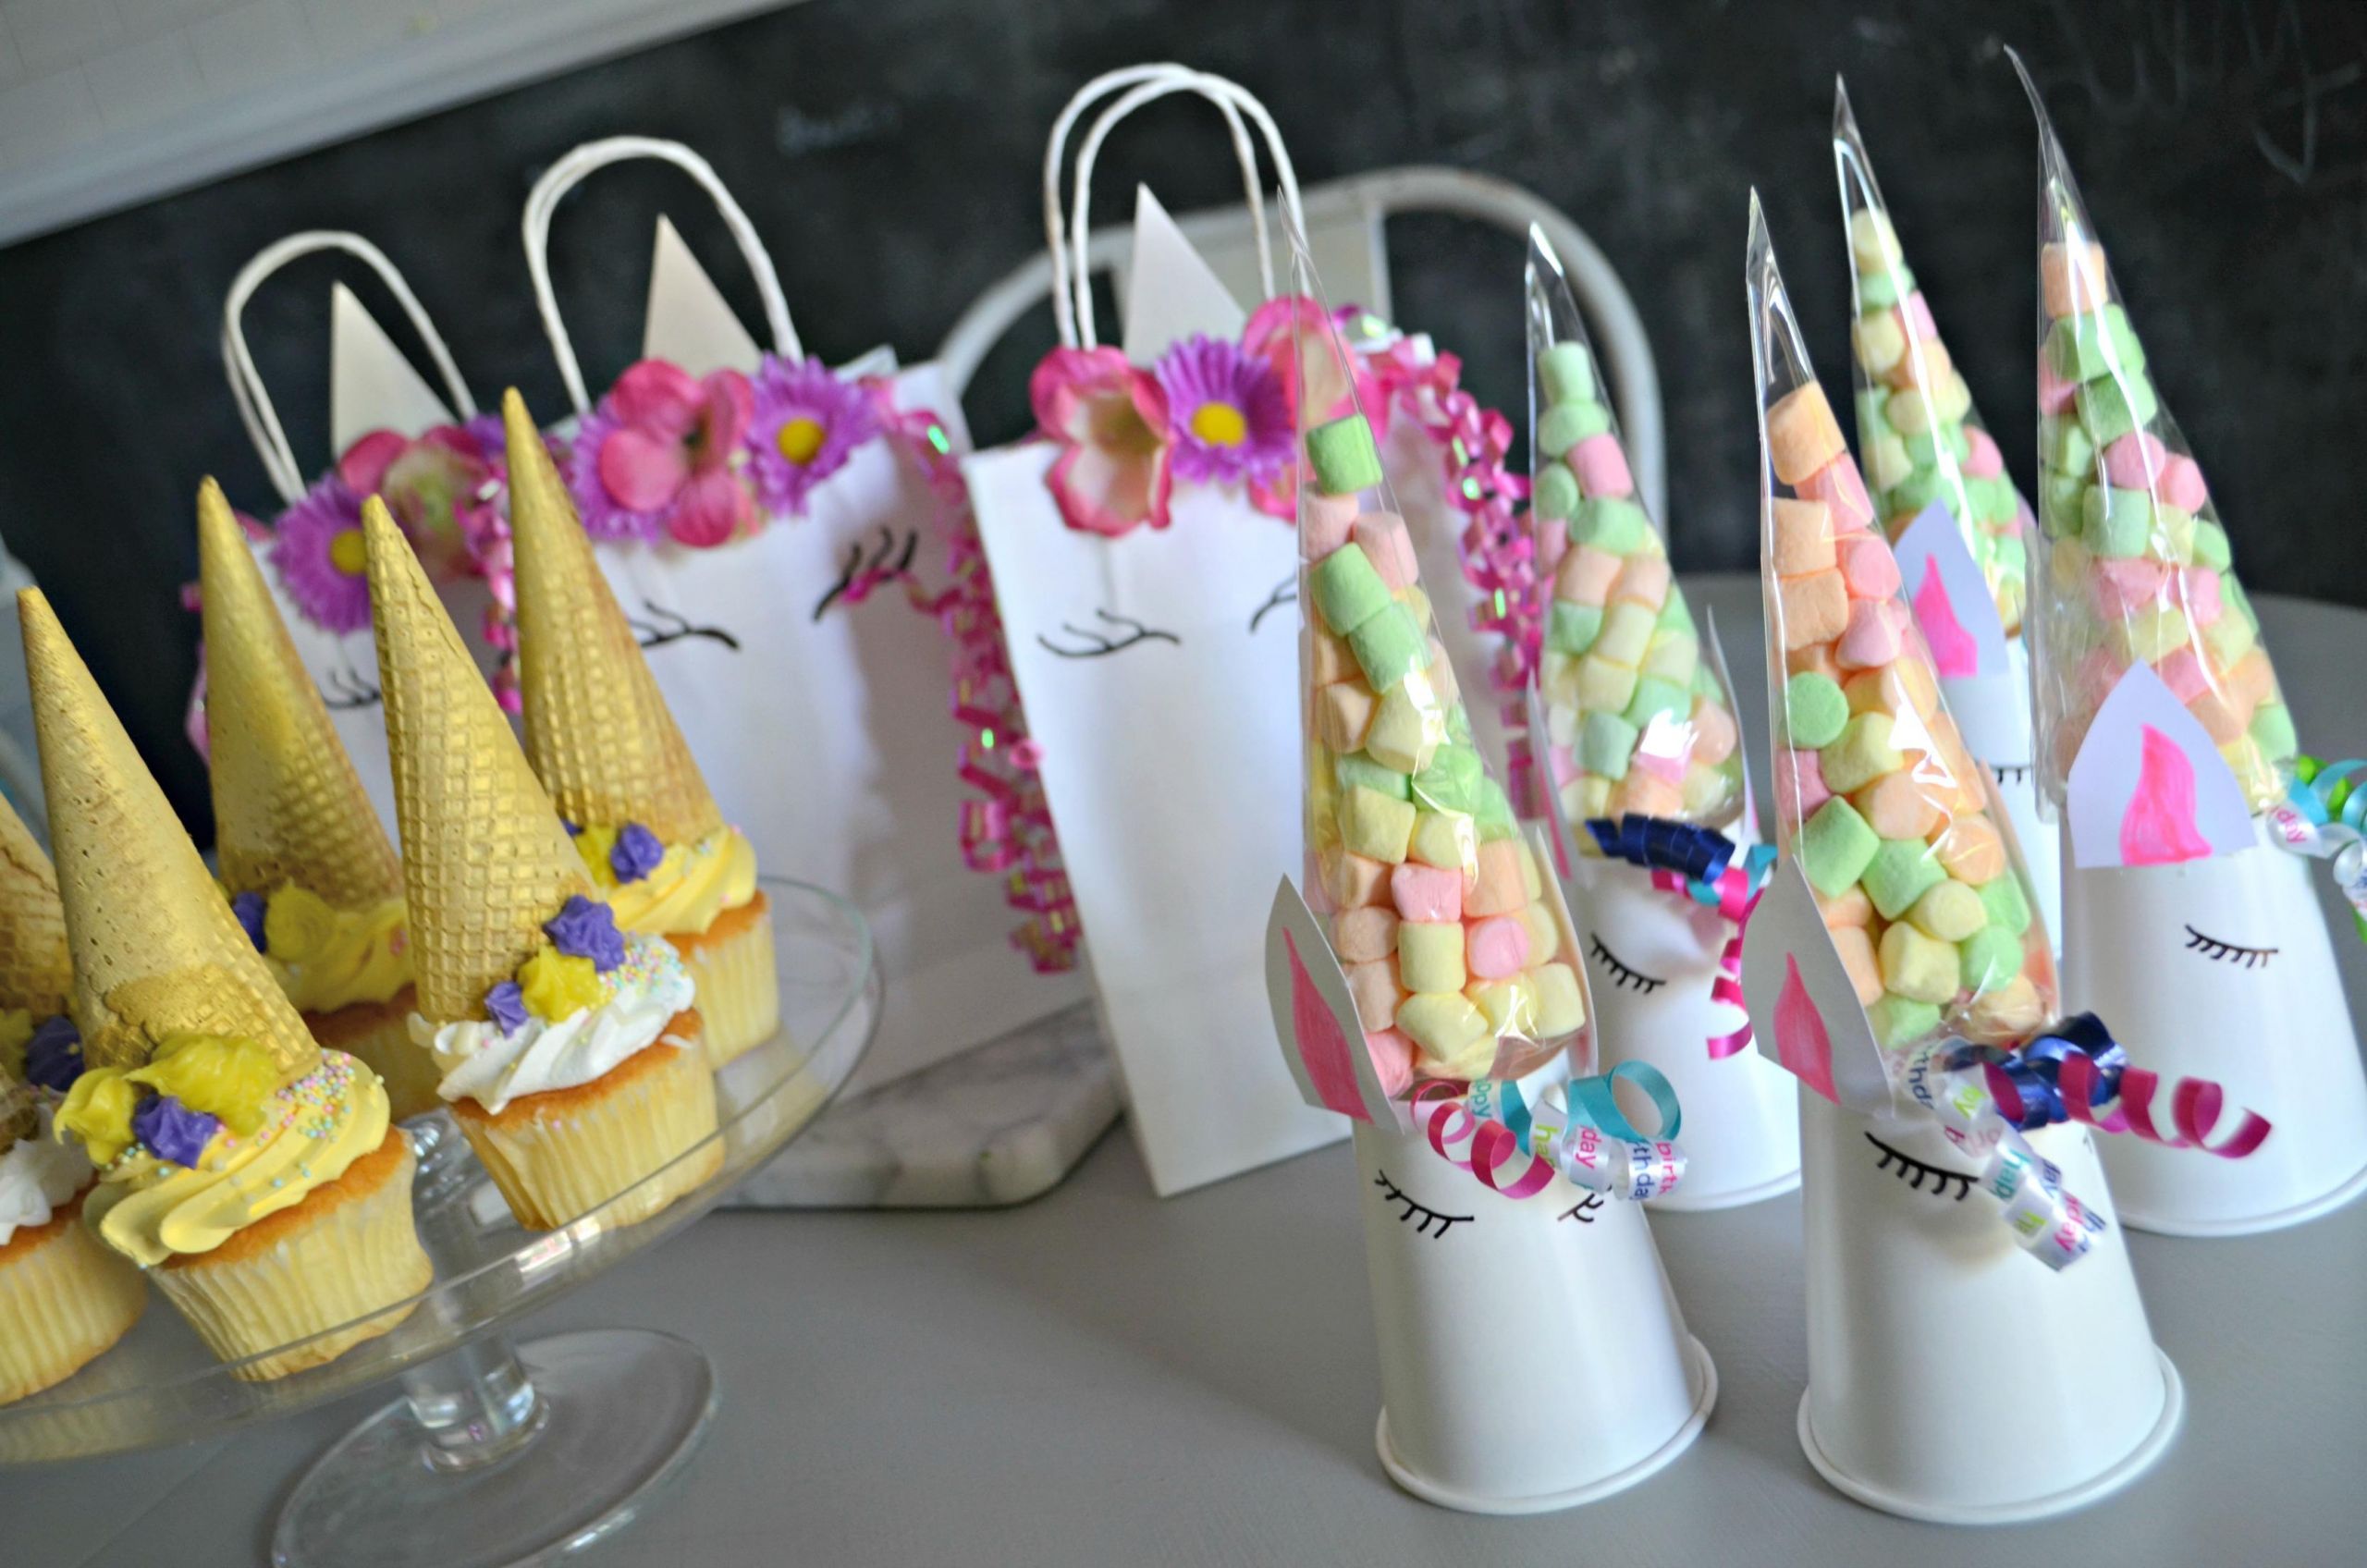 Unicorn Party Centerpiece Ideas
 Make These 3 Frugal Cute and Easy DIY Unicorn Birthday